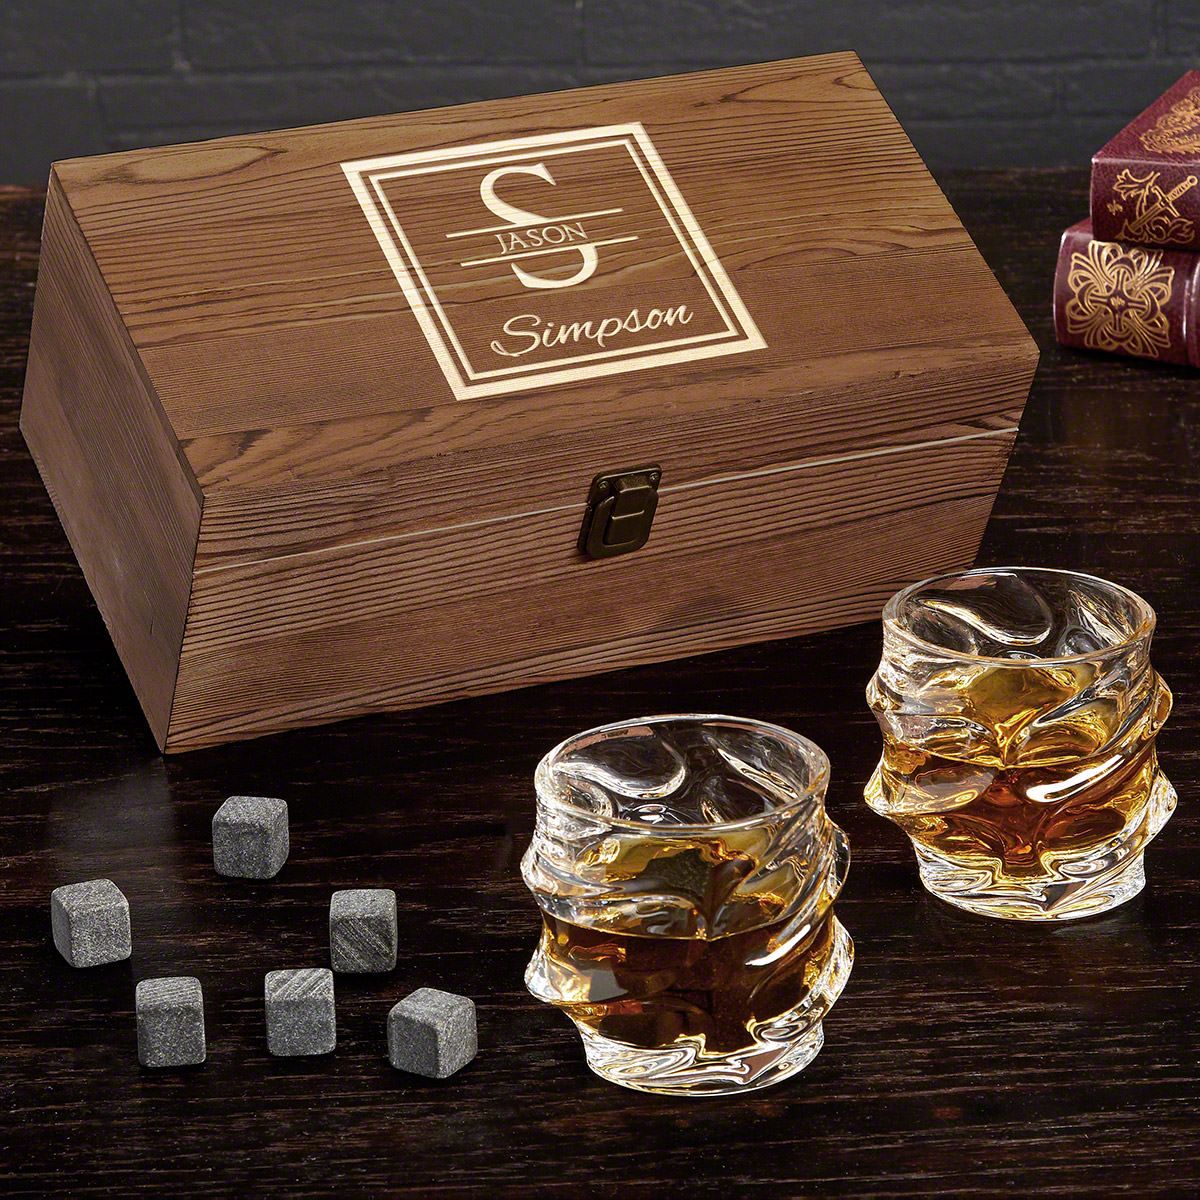 Custom Whiskey Set in Customized Wood Box as Gift for Father. Personalised Whiskey Set with Whiskey Stones and Personalised Wood Box Bourbon Glass Gift Set for Him